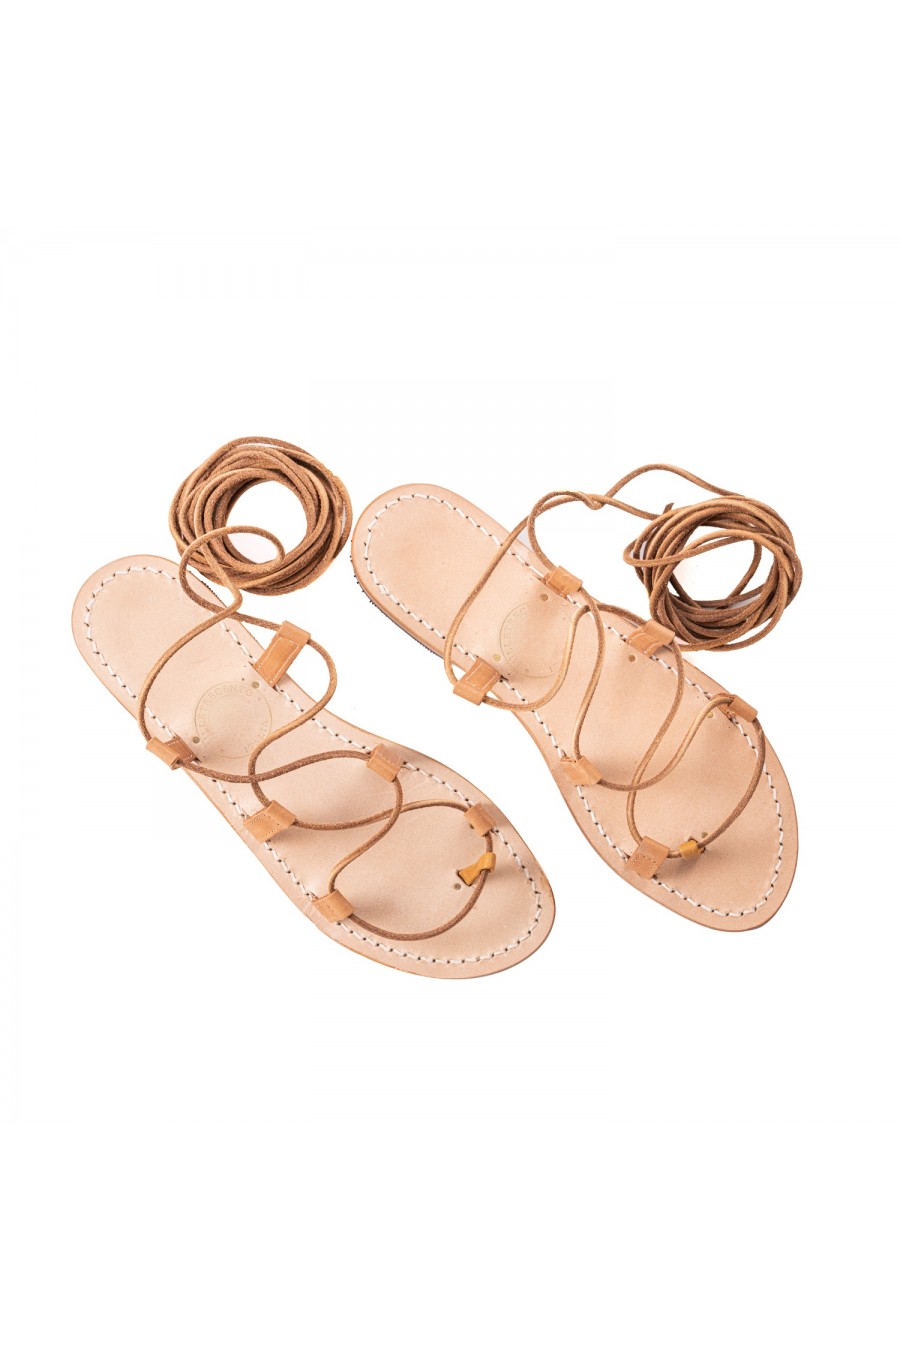 Bologna Cuoio Handcrafted gladiator sandals